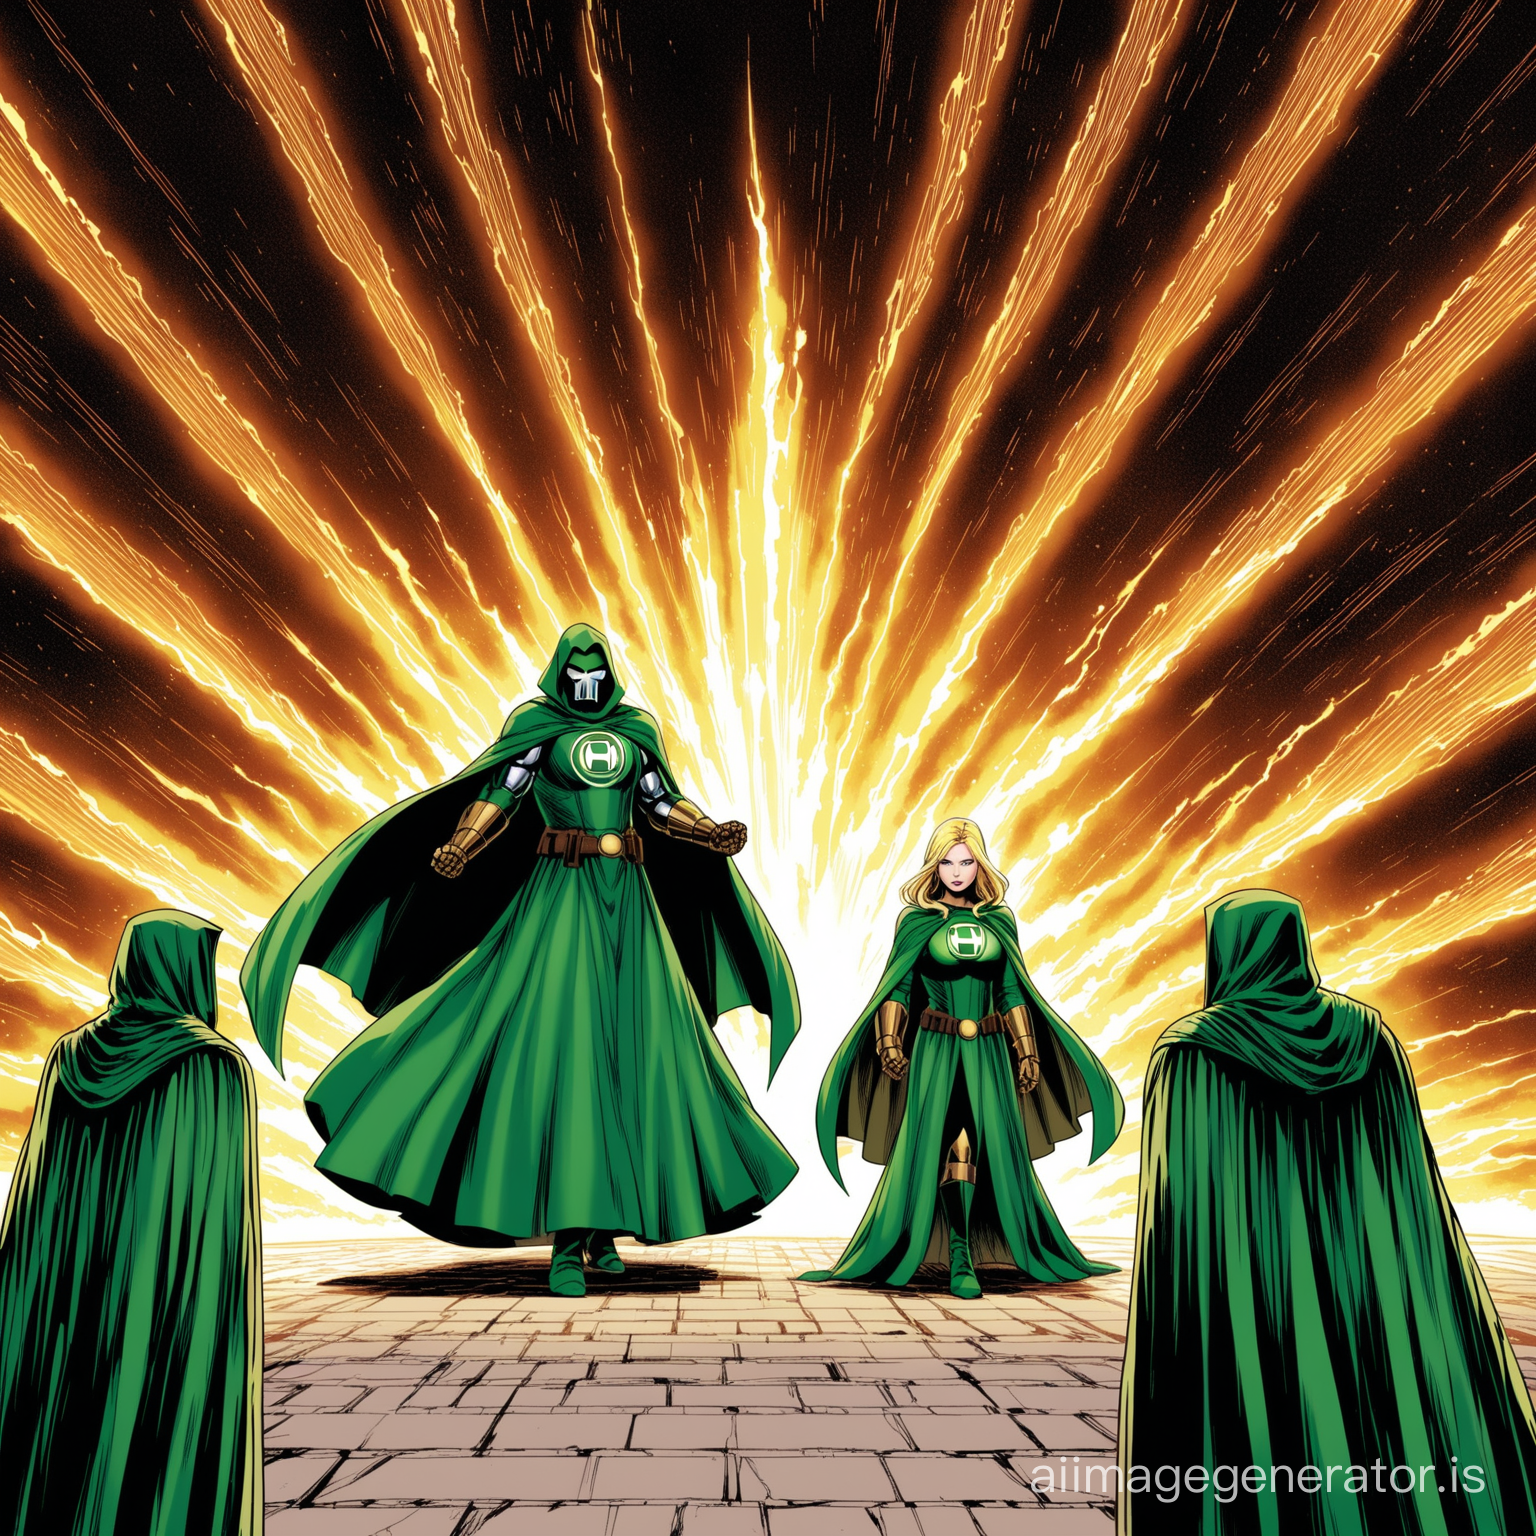 Doctor Doom hypnotizing Sue Storm in a floor-length Medieval billowing dress with heavy cloak